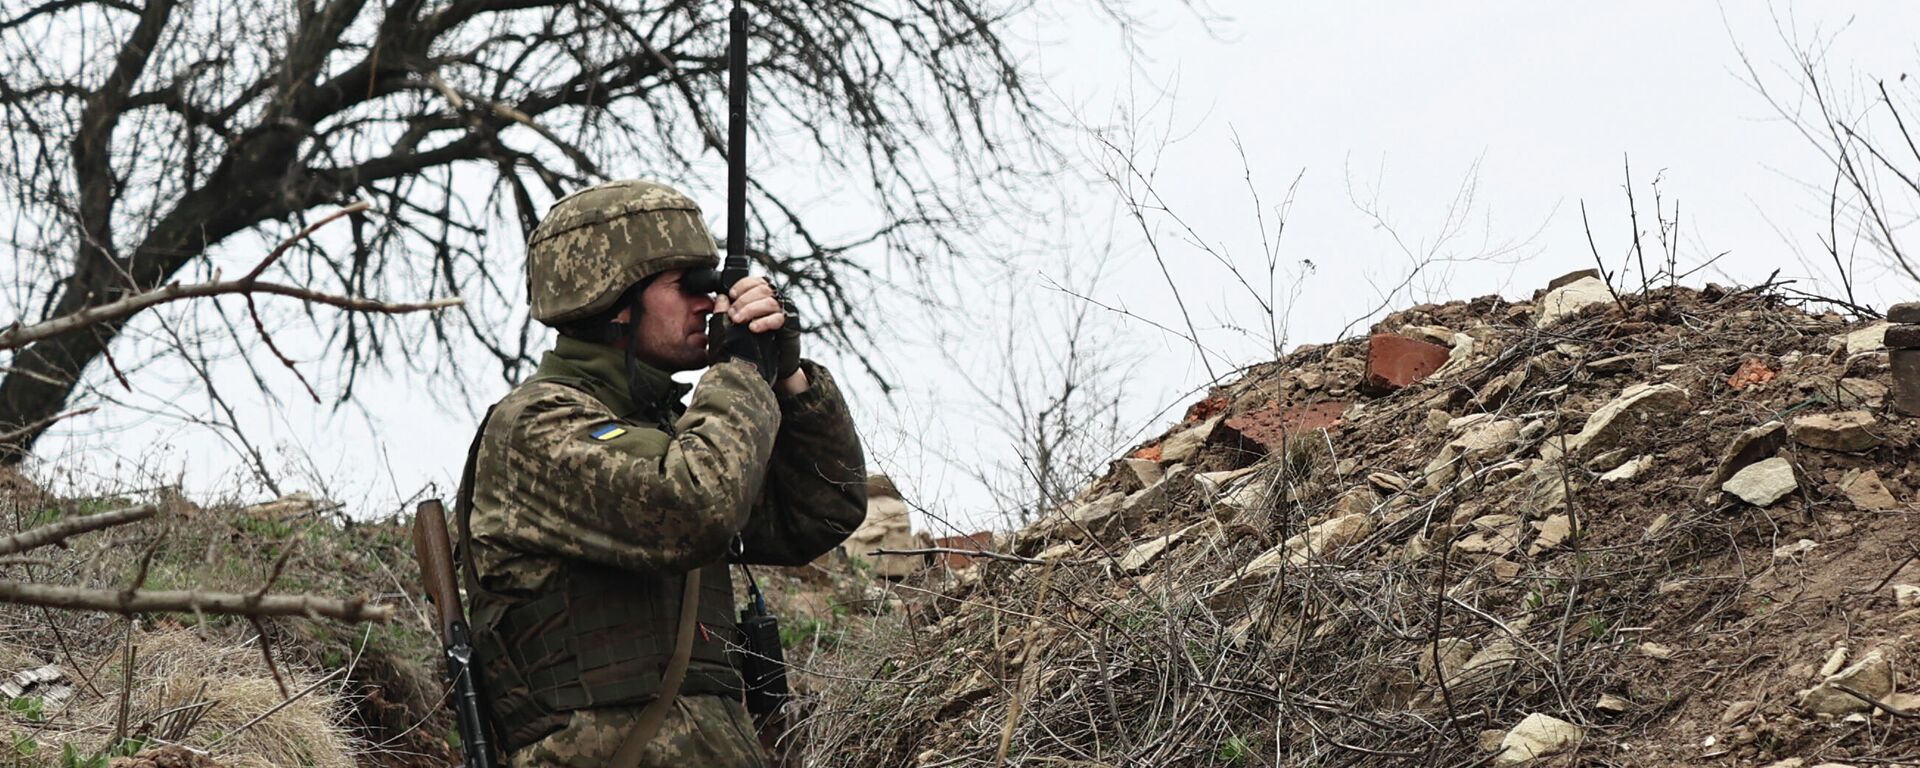 FILE - In this April 12, 2021, file photo, Ukrainian soldier watches through a periscope at fighting positions near Donetsk, Ukraine - Sputnik International, 1920, 01.12.2021